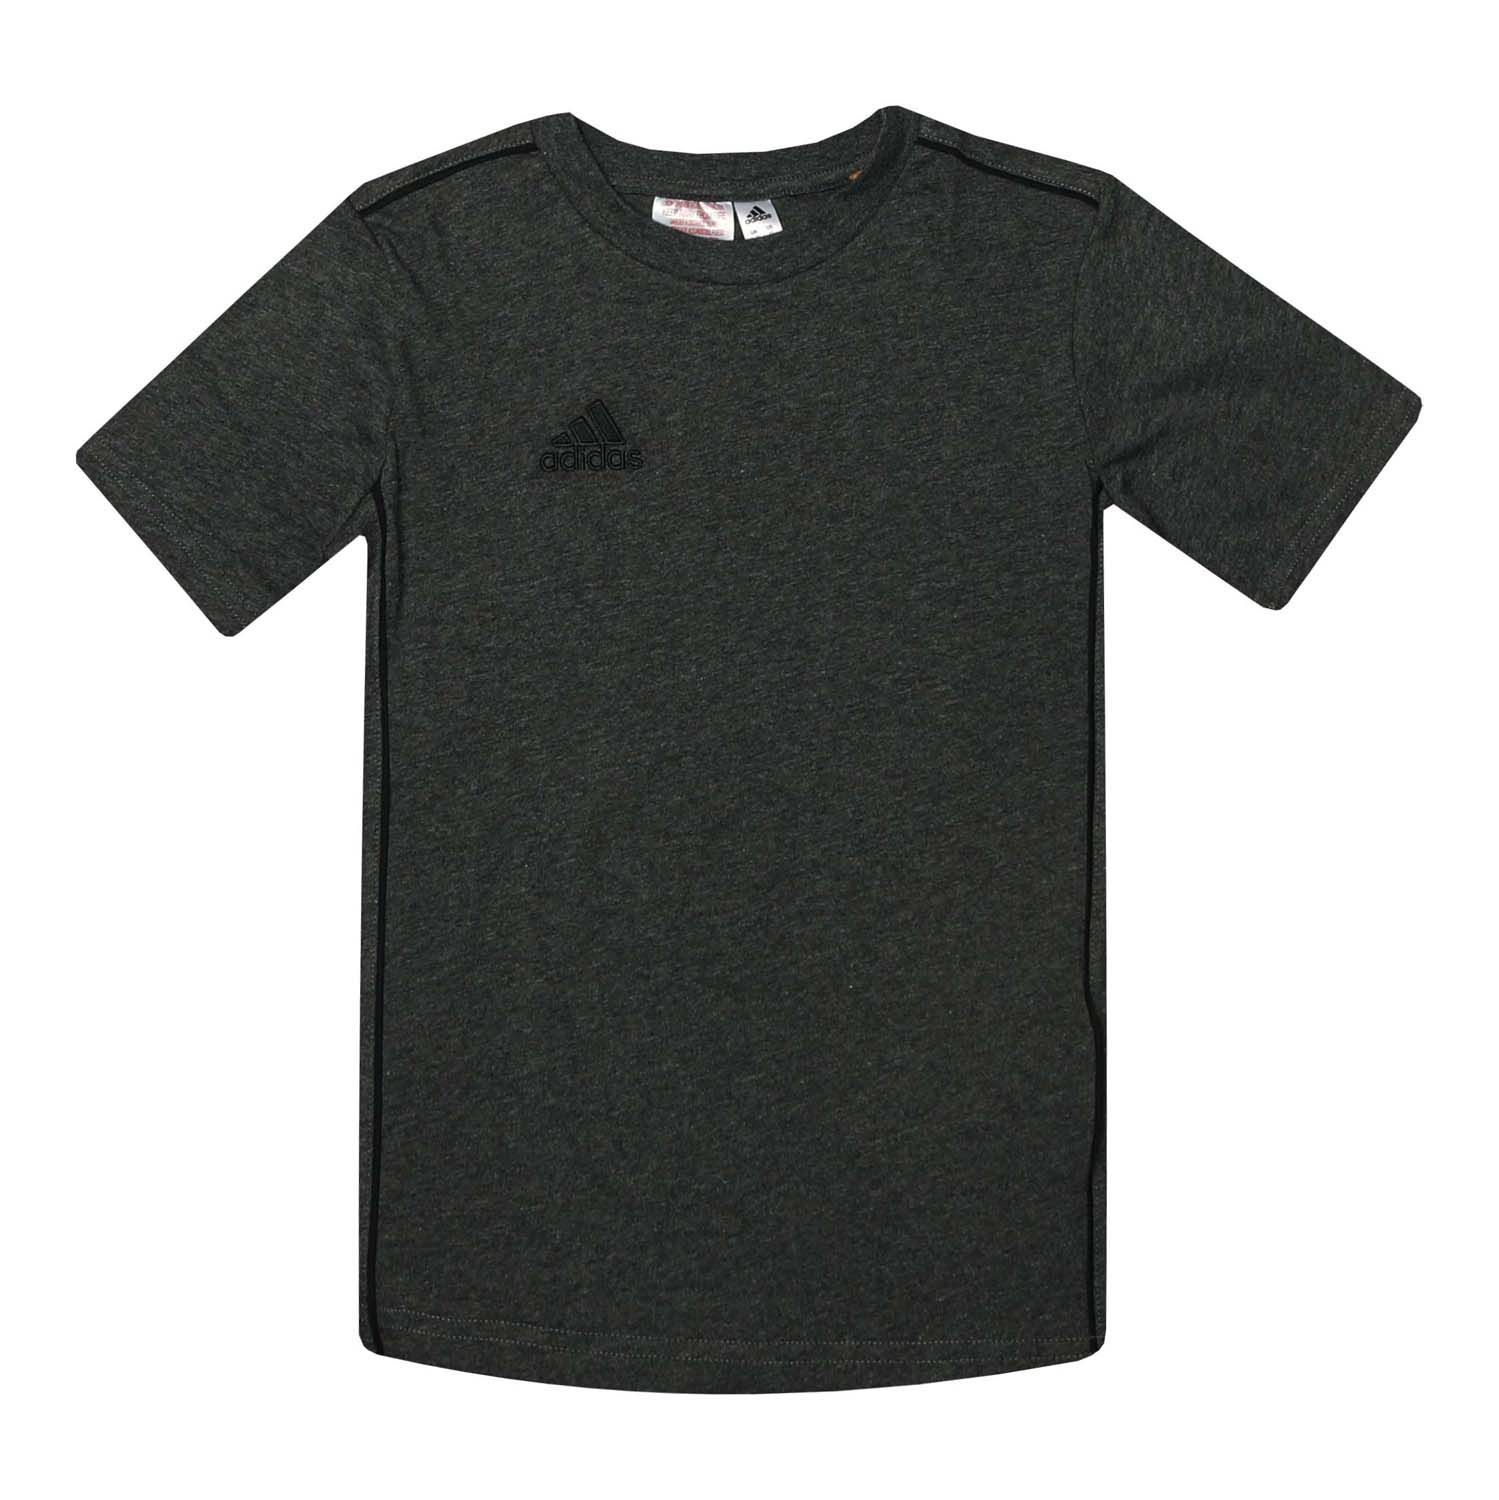 Junior adidas Core 18 T-Shirt in charcoal marl.- Ribbed crew neck.- Short sleeves.- adidas branding.- Regular fit.- 100% cotton single jersey.- Ref: FS3250J